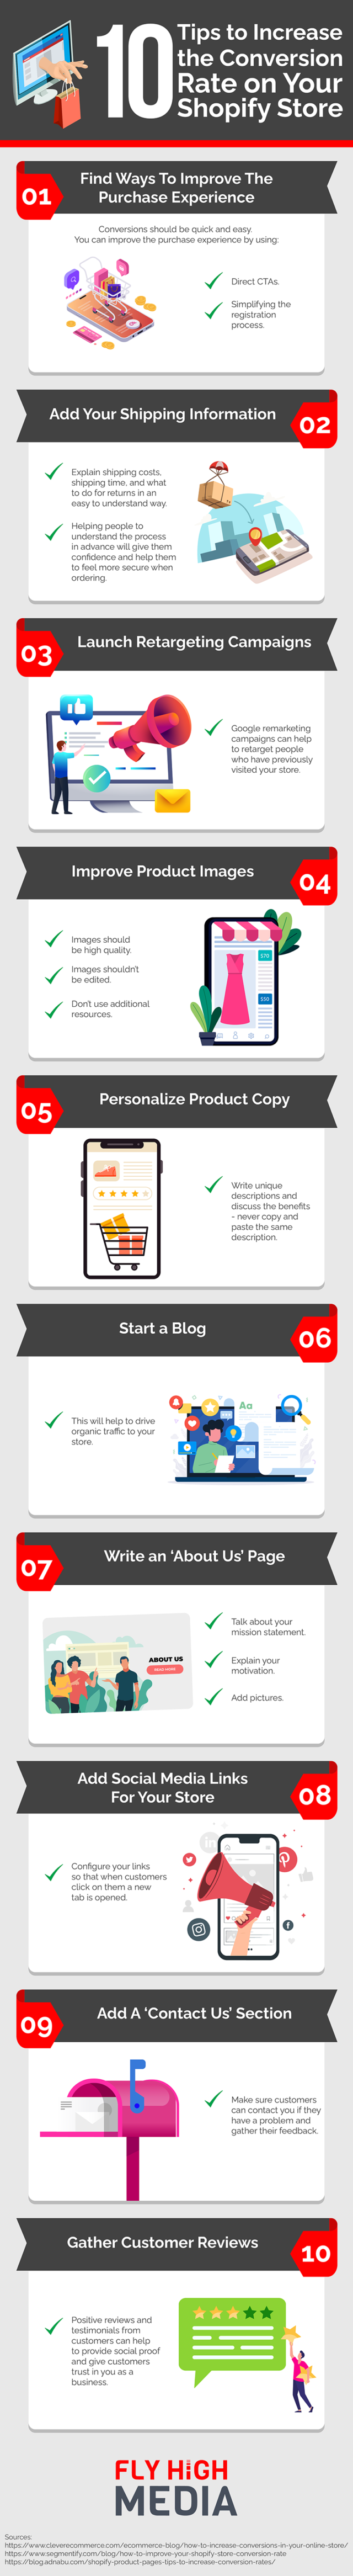 10 tips to increase the conversion rate on your shopify store - infographic.